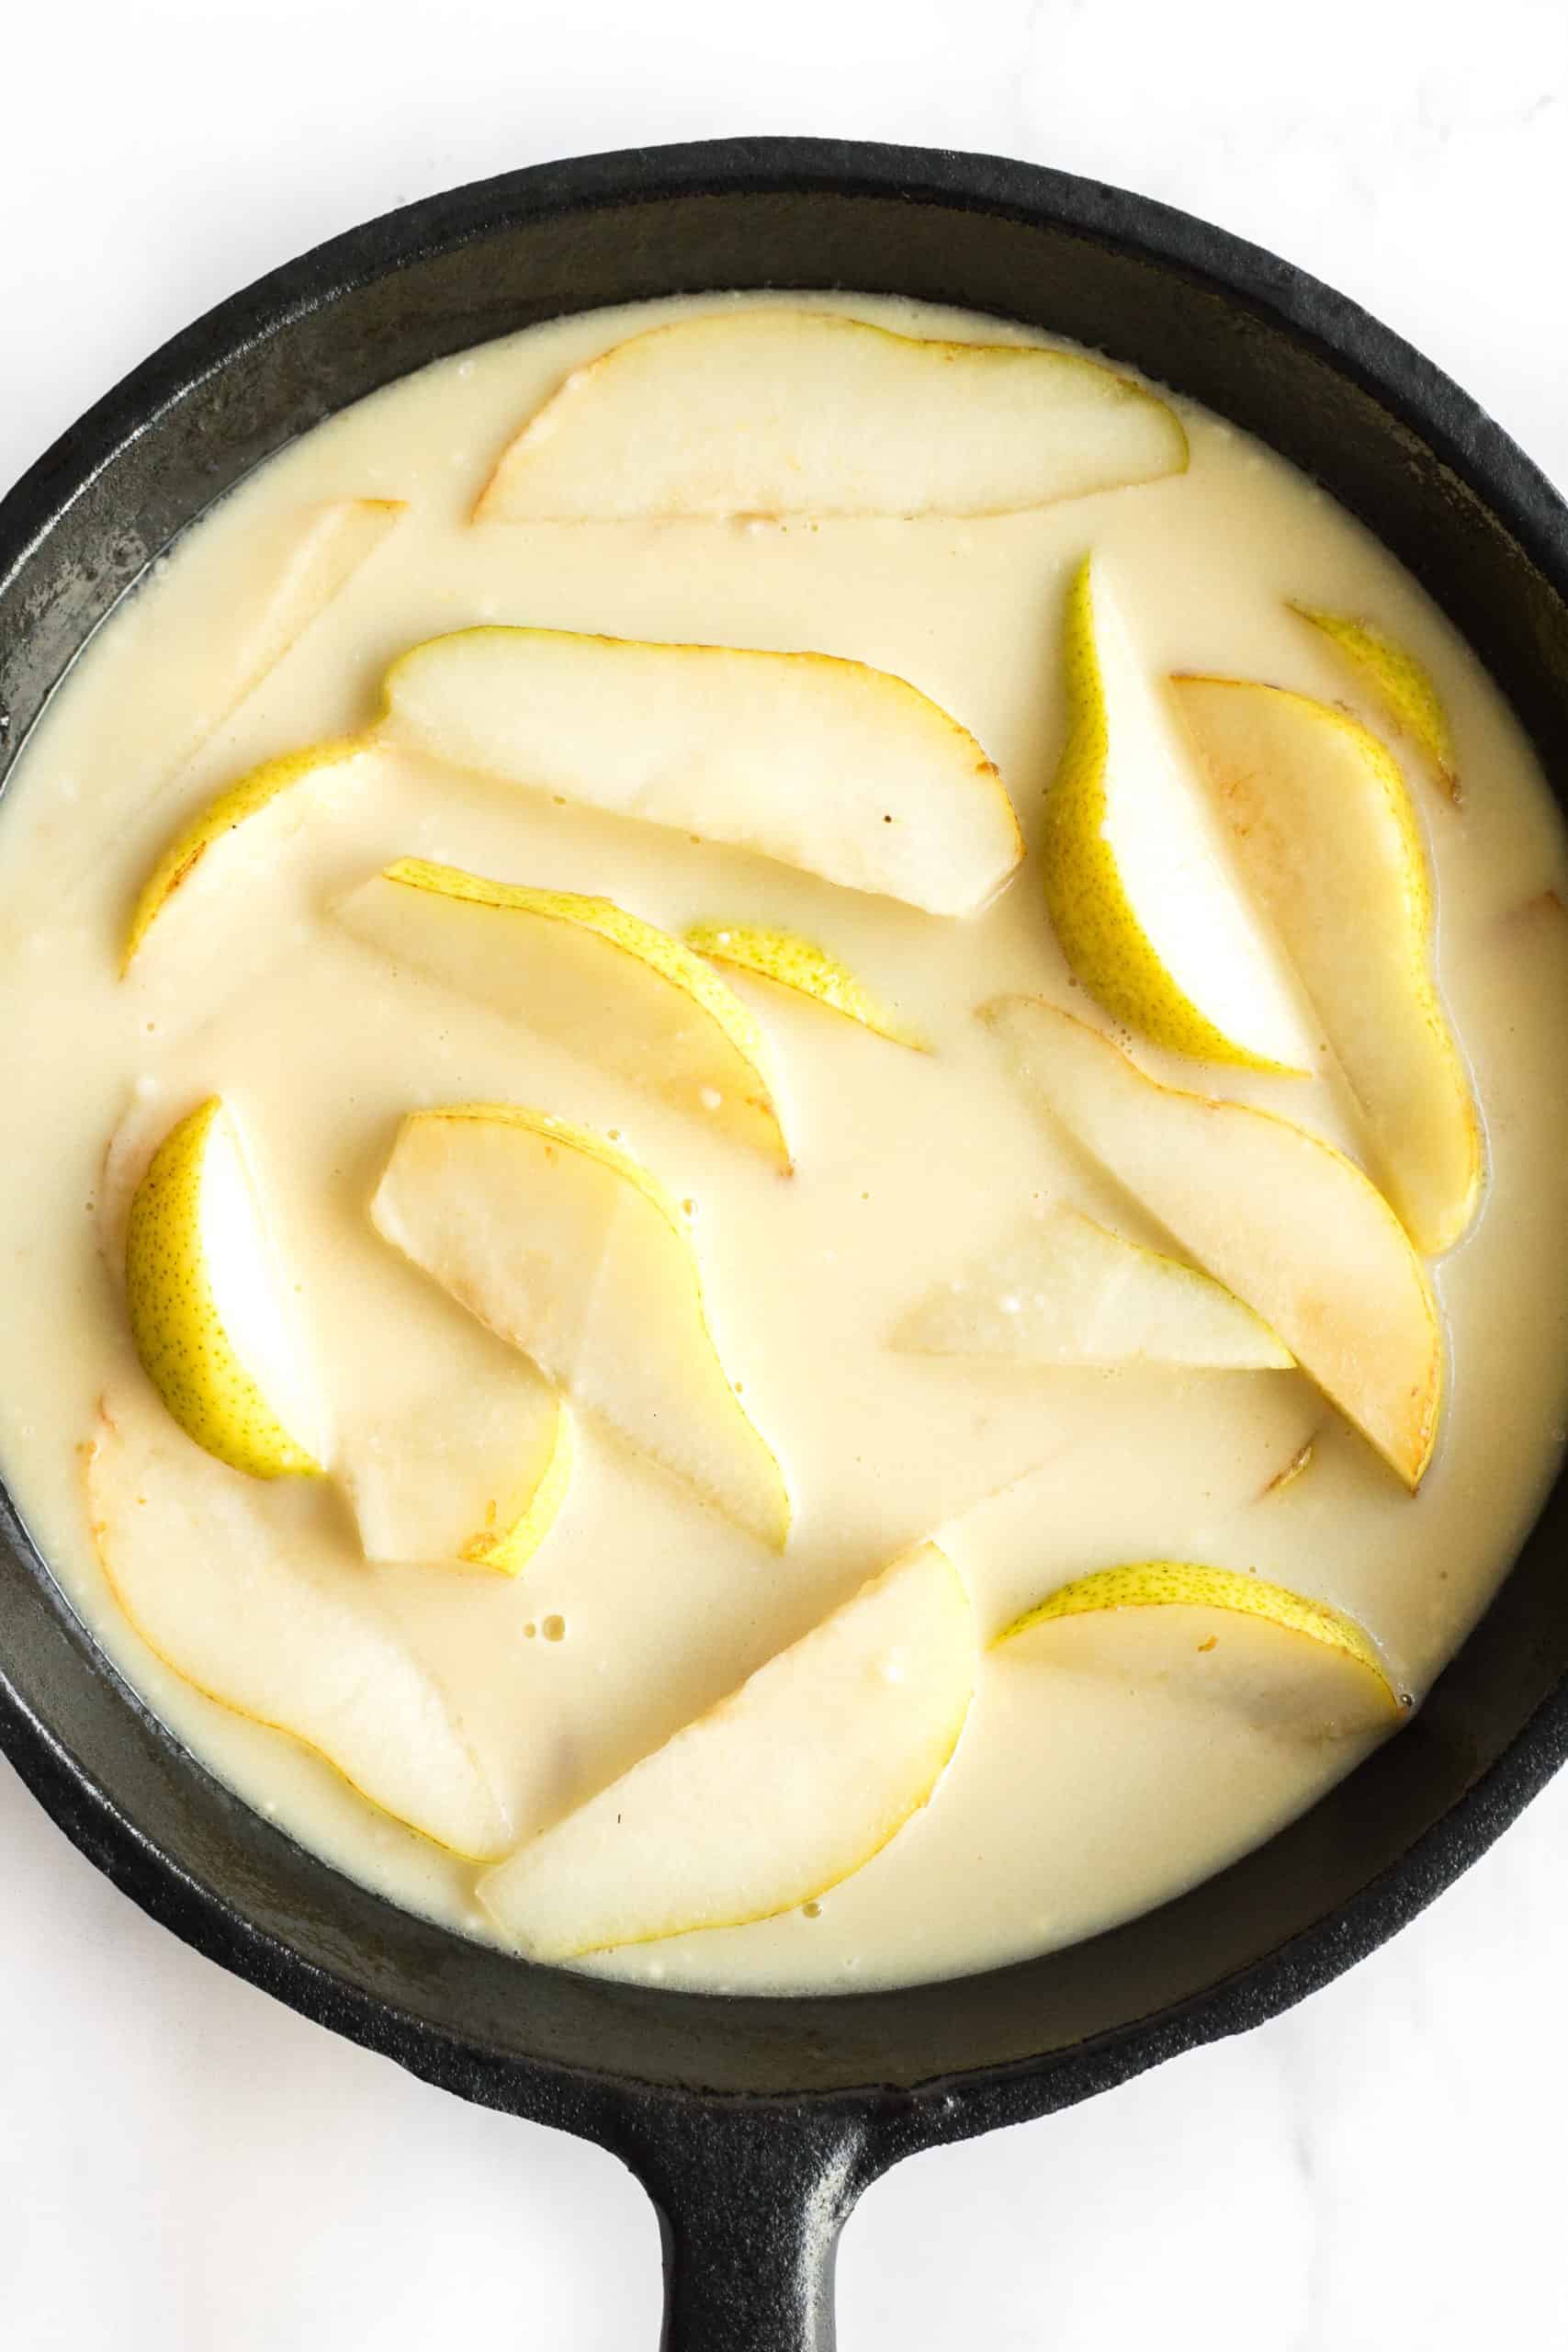 Mise en place for pear custard pie (pear slices with custard batter in cast iron skillet)